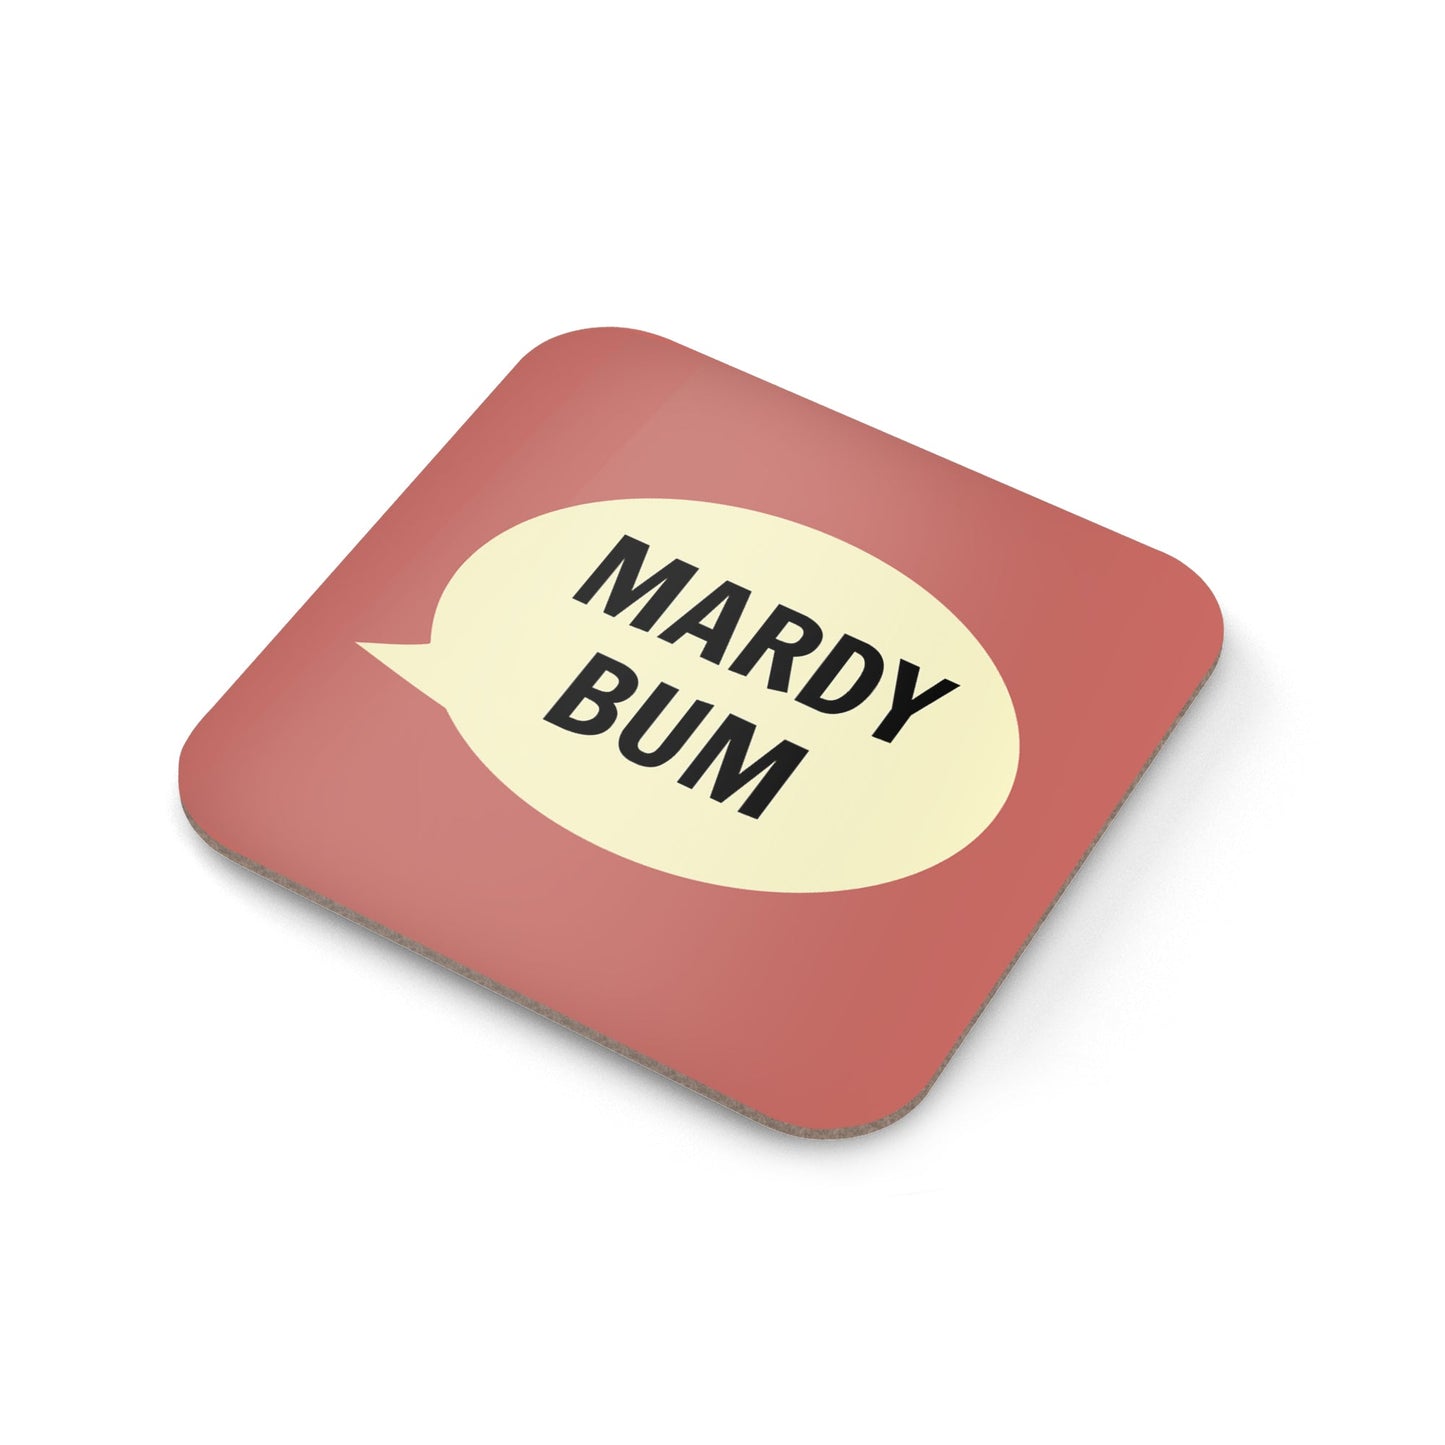 Mardy Bum Coaster - The Great Yorkshire Shop